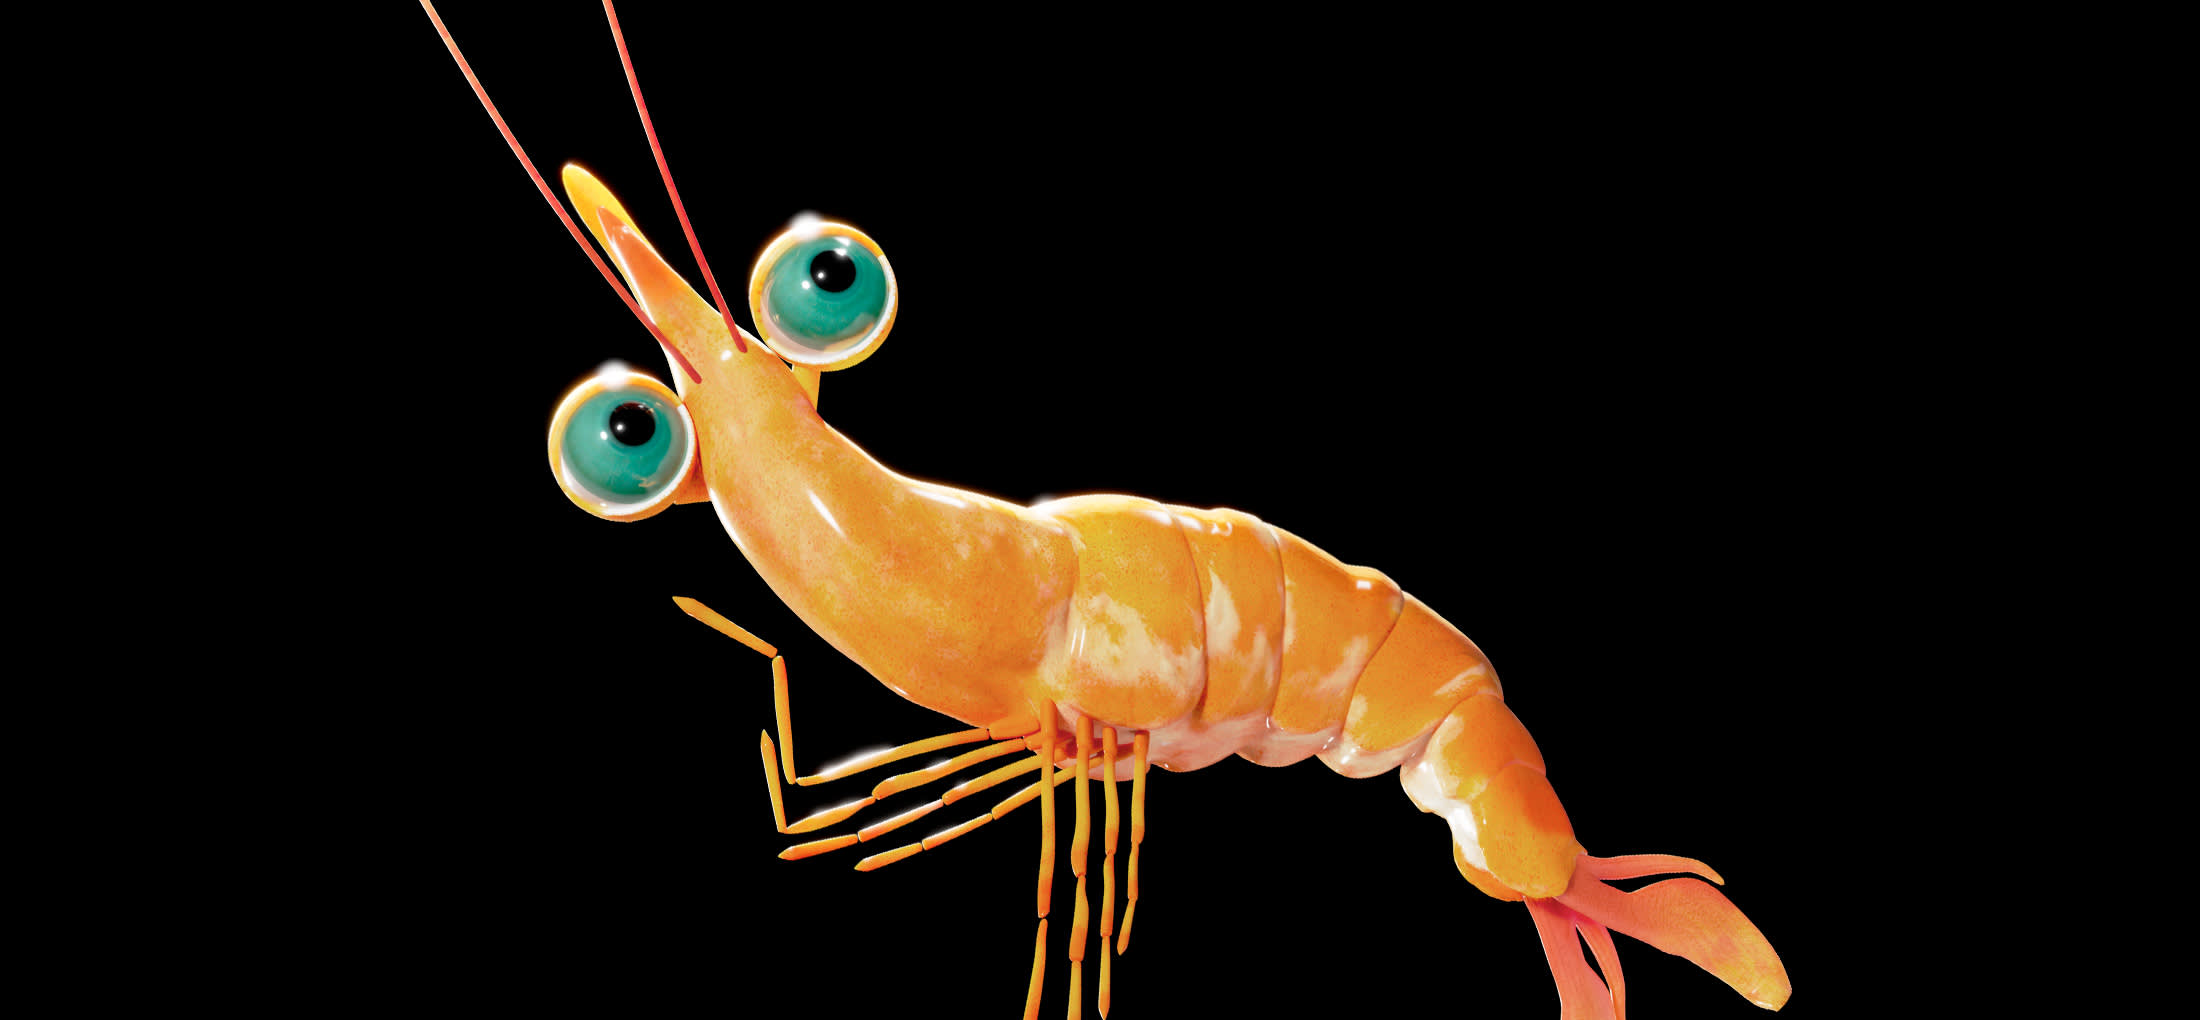 A cute little vibrant prawn dancing to a non-existent beat.